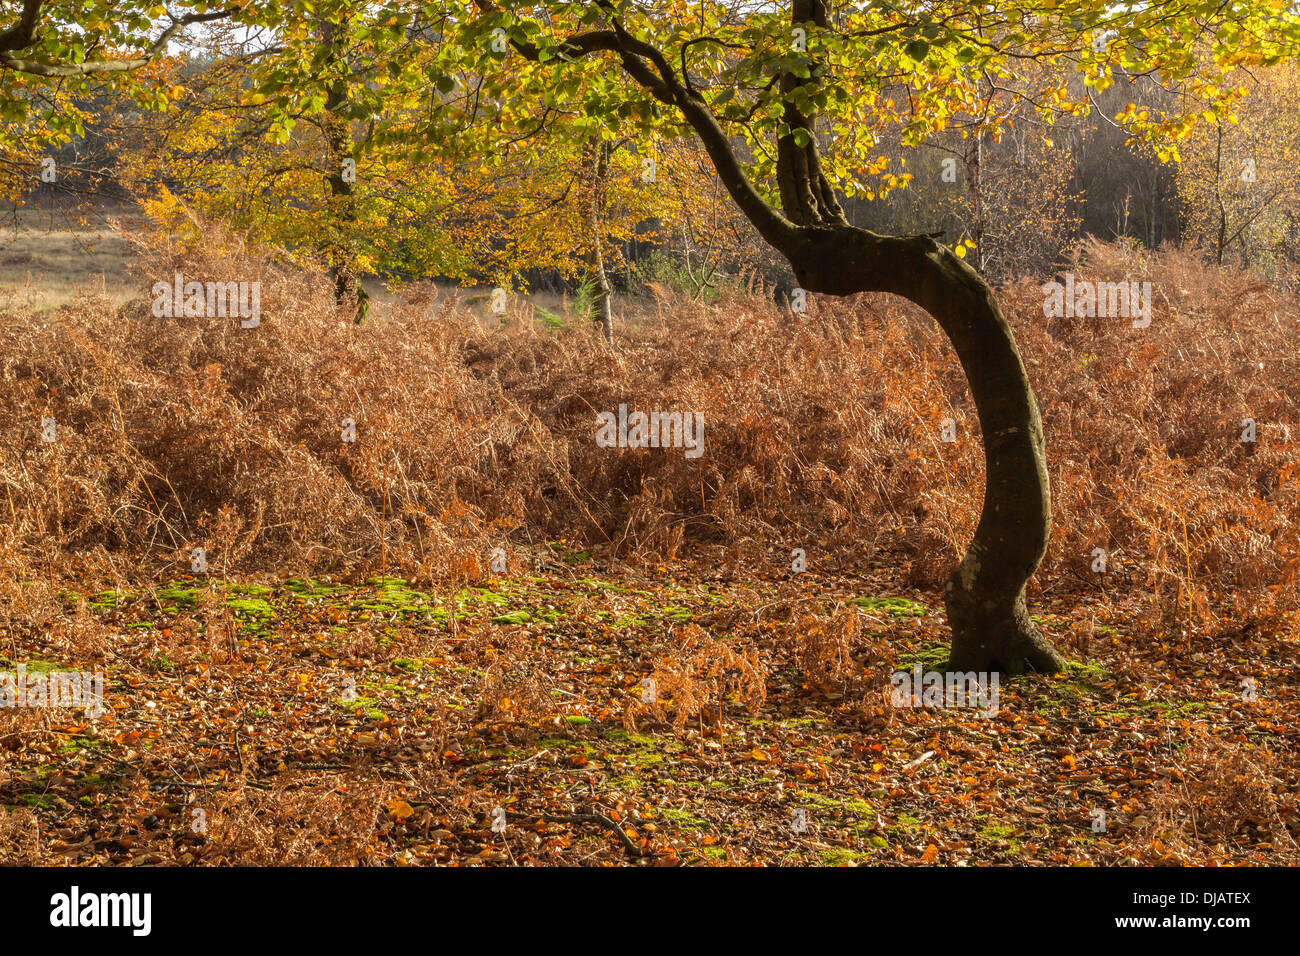 Beech Tree with Autumn Leaves and Bracken in The New Forest, Hampshire, England, UK. Stock Photo